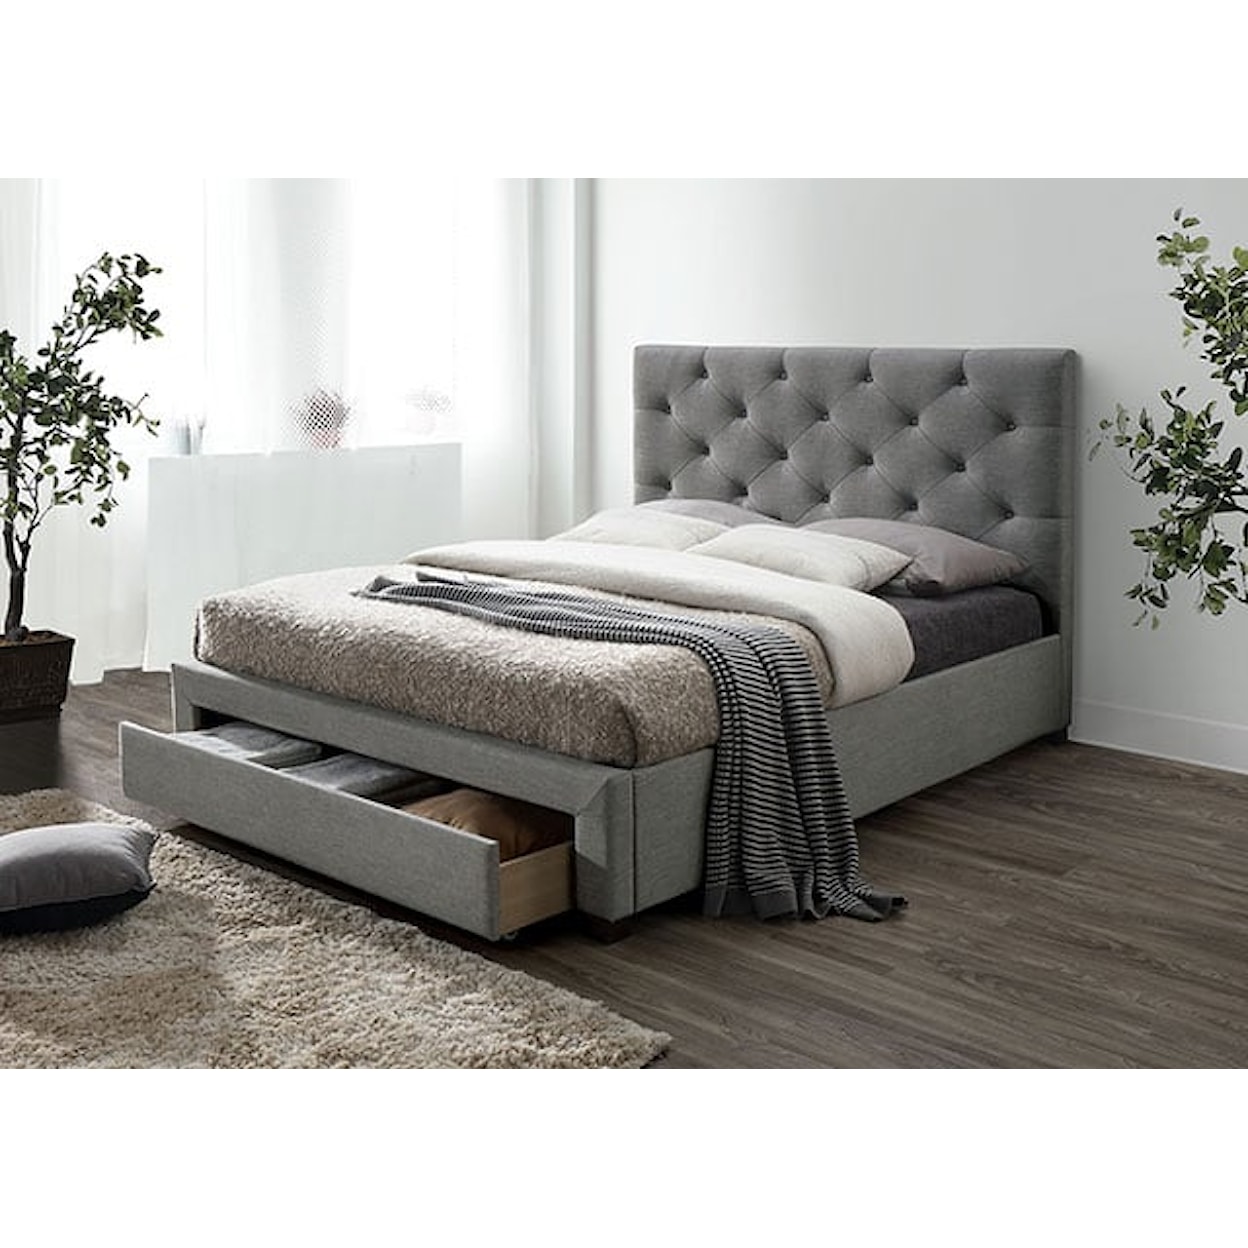 Furniture of America Sybella Youth Twin Bed